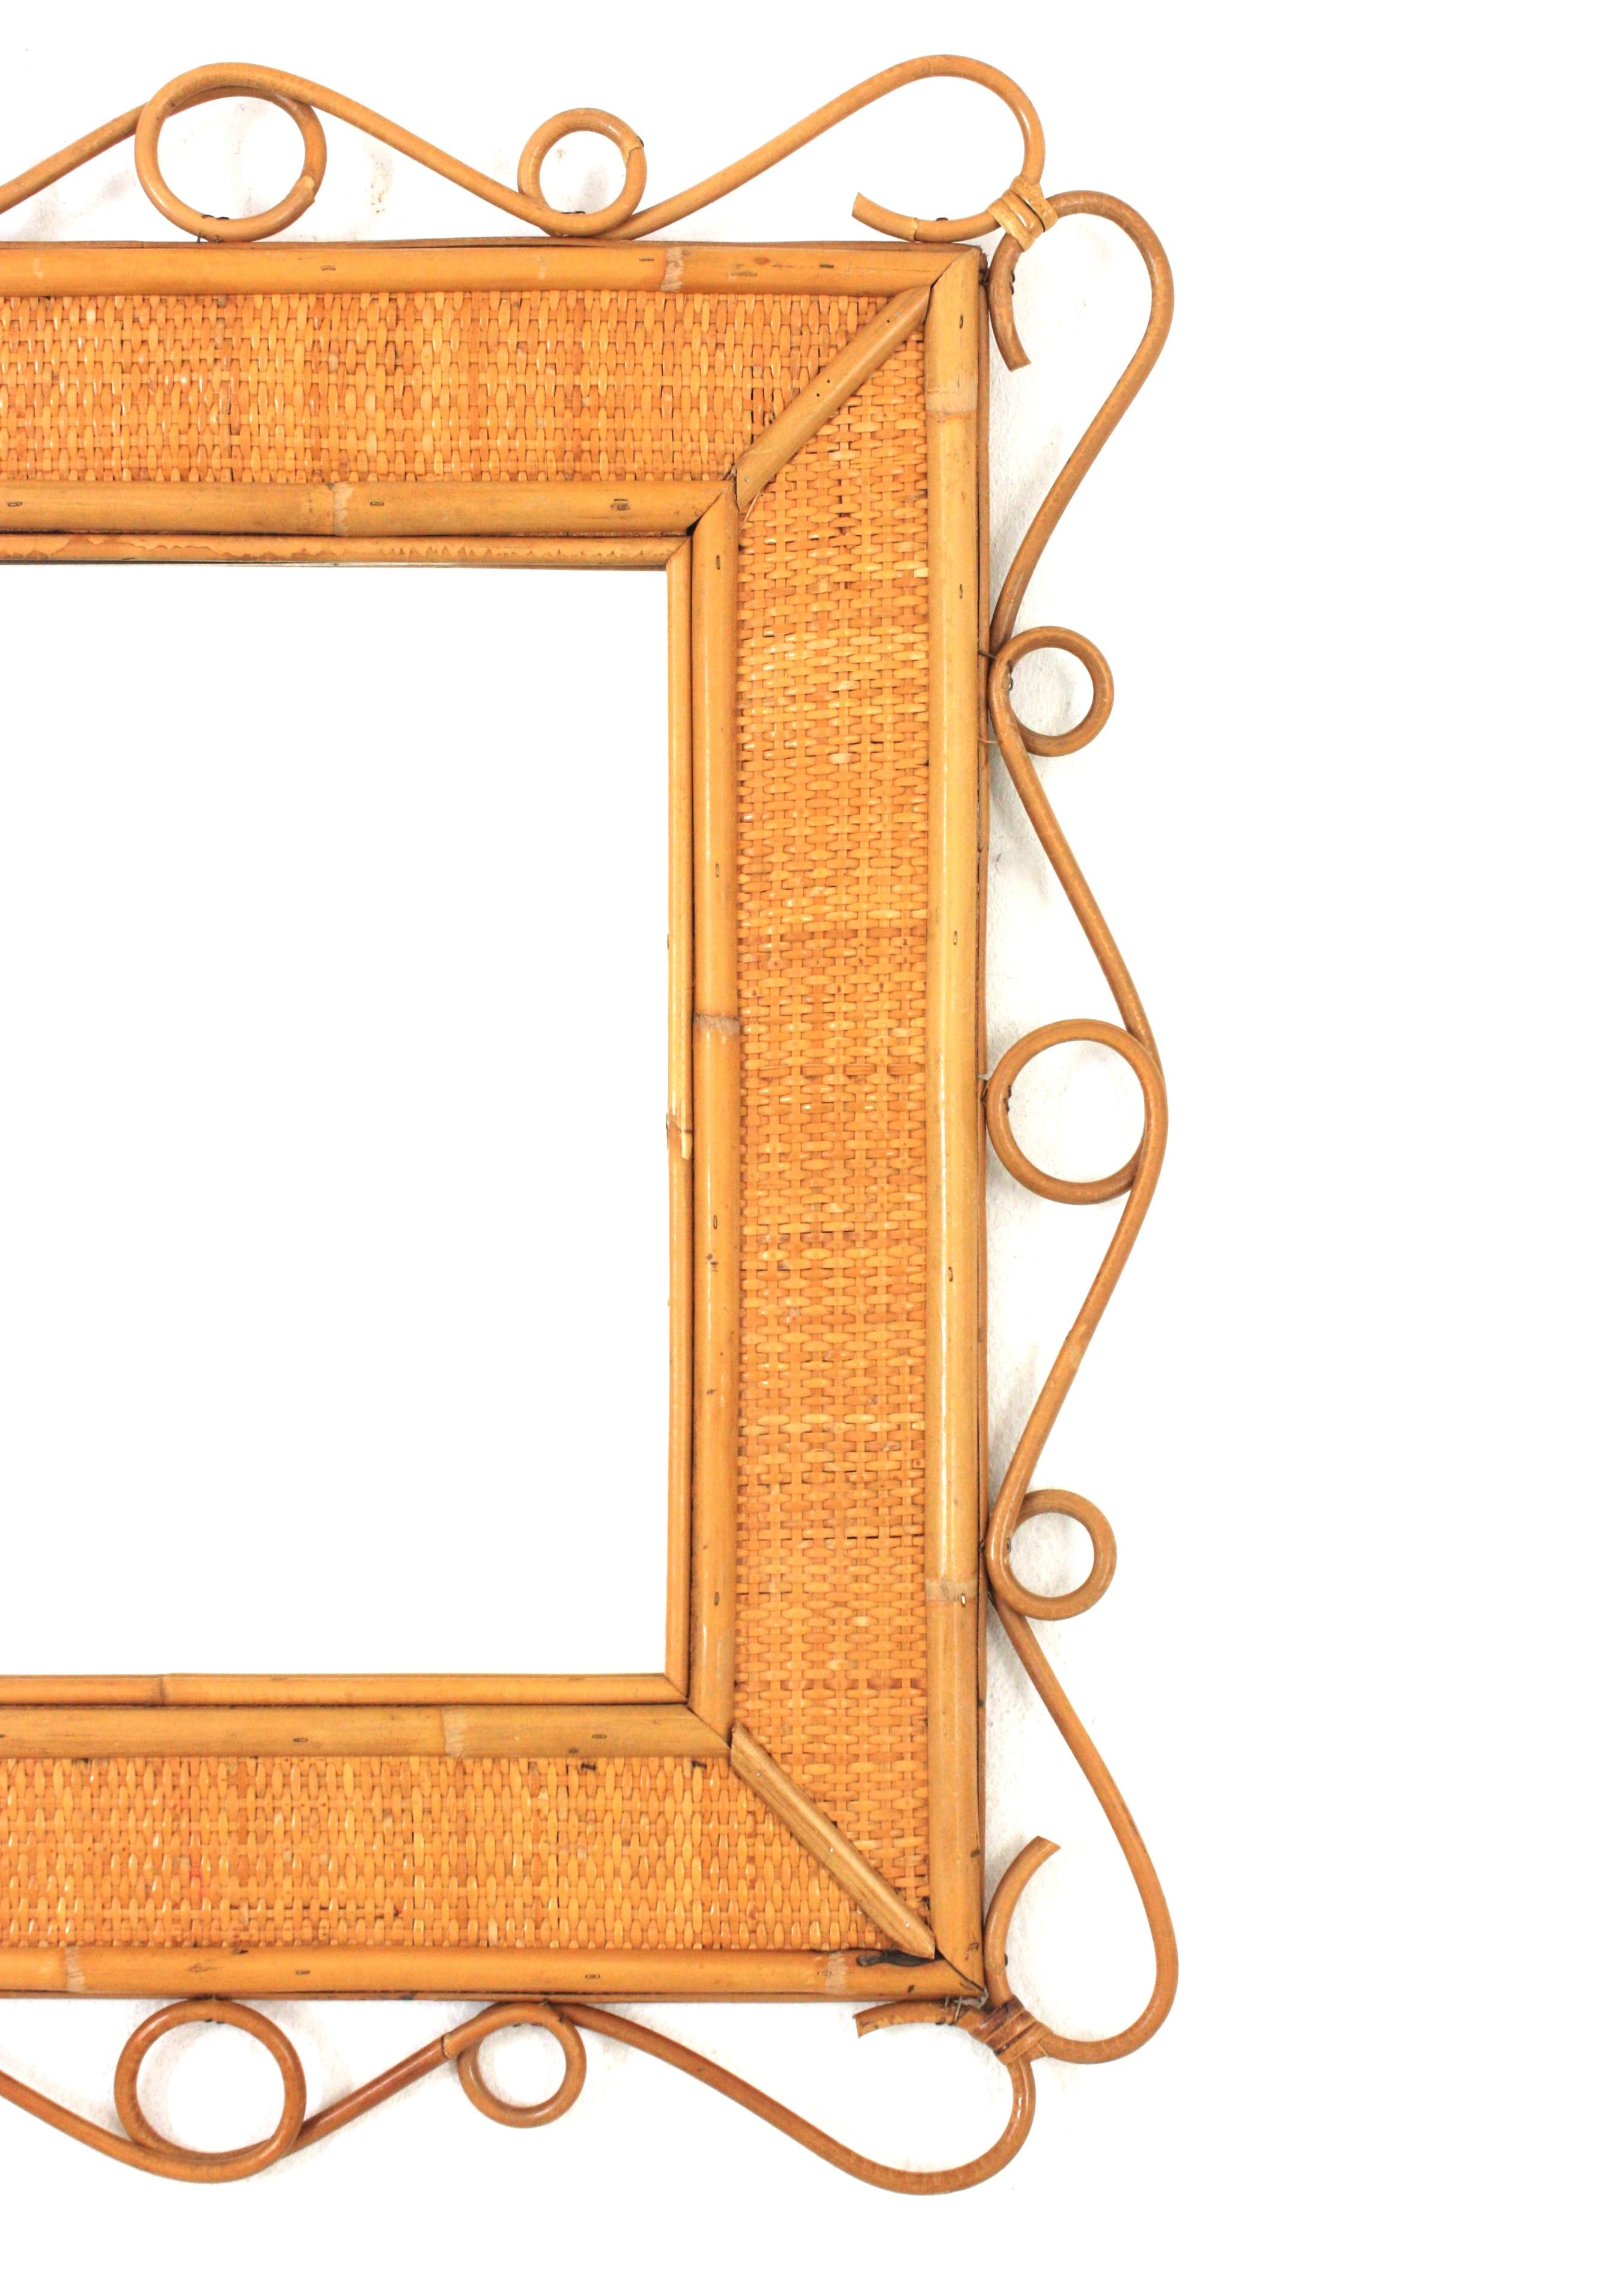 Rattan Rectangular Mirror with Scroll Motif, Franco Albini Style In Good Condition For Sale In Barcelona, ES